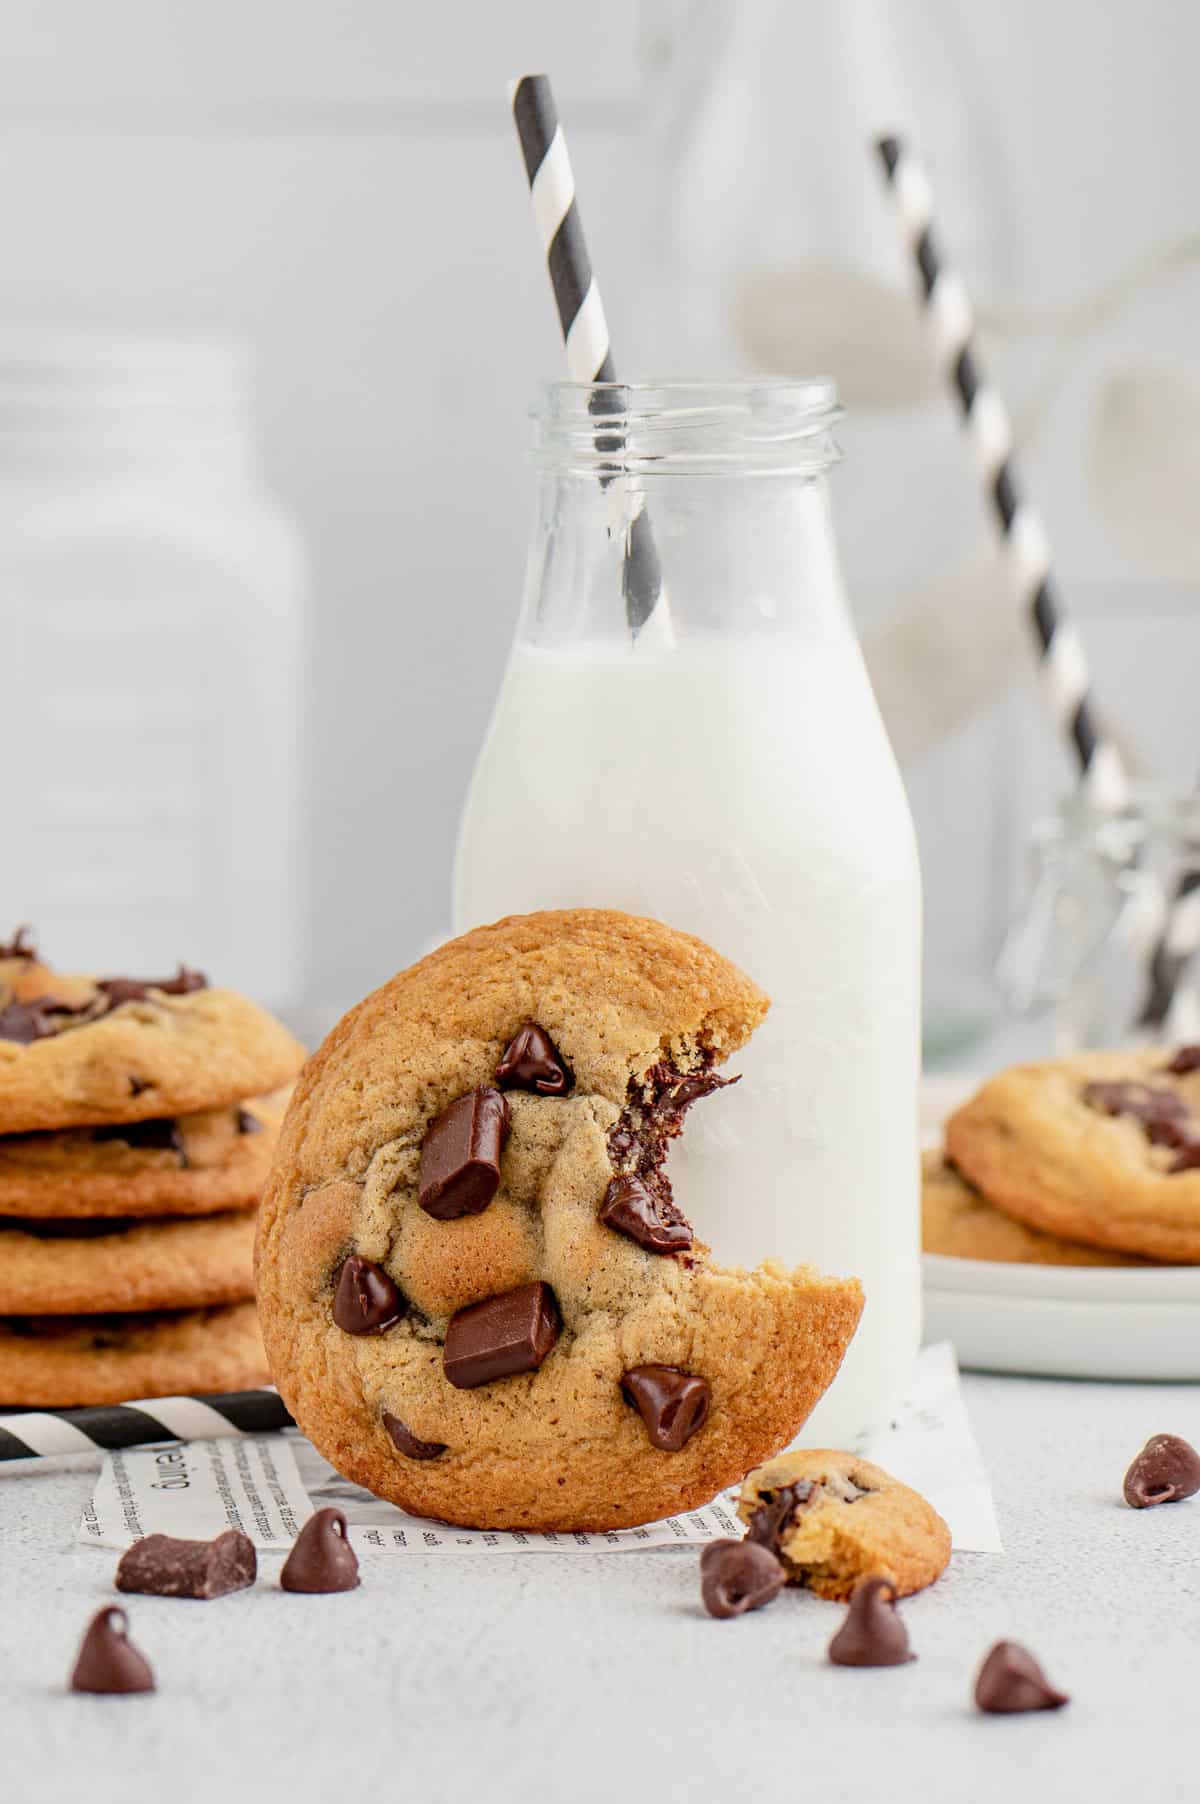 A chocolate chip cookie with a bite taken out leaned up against a glass of milk.